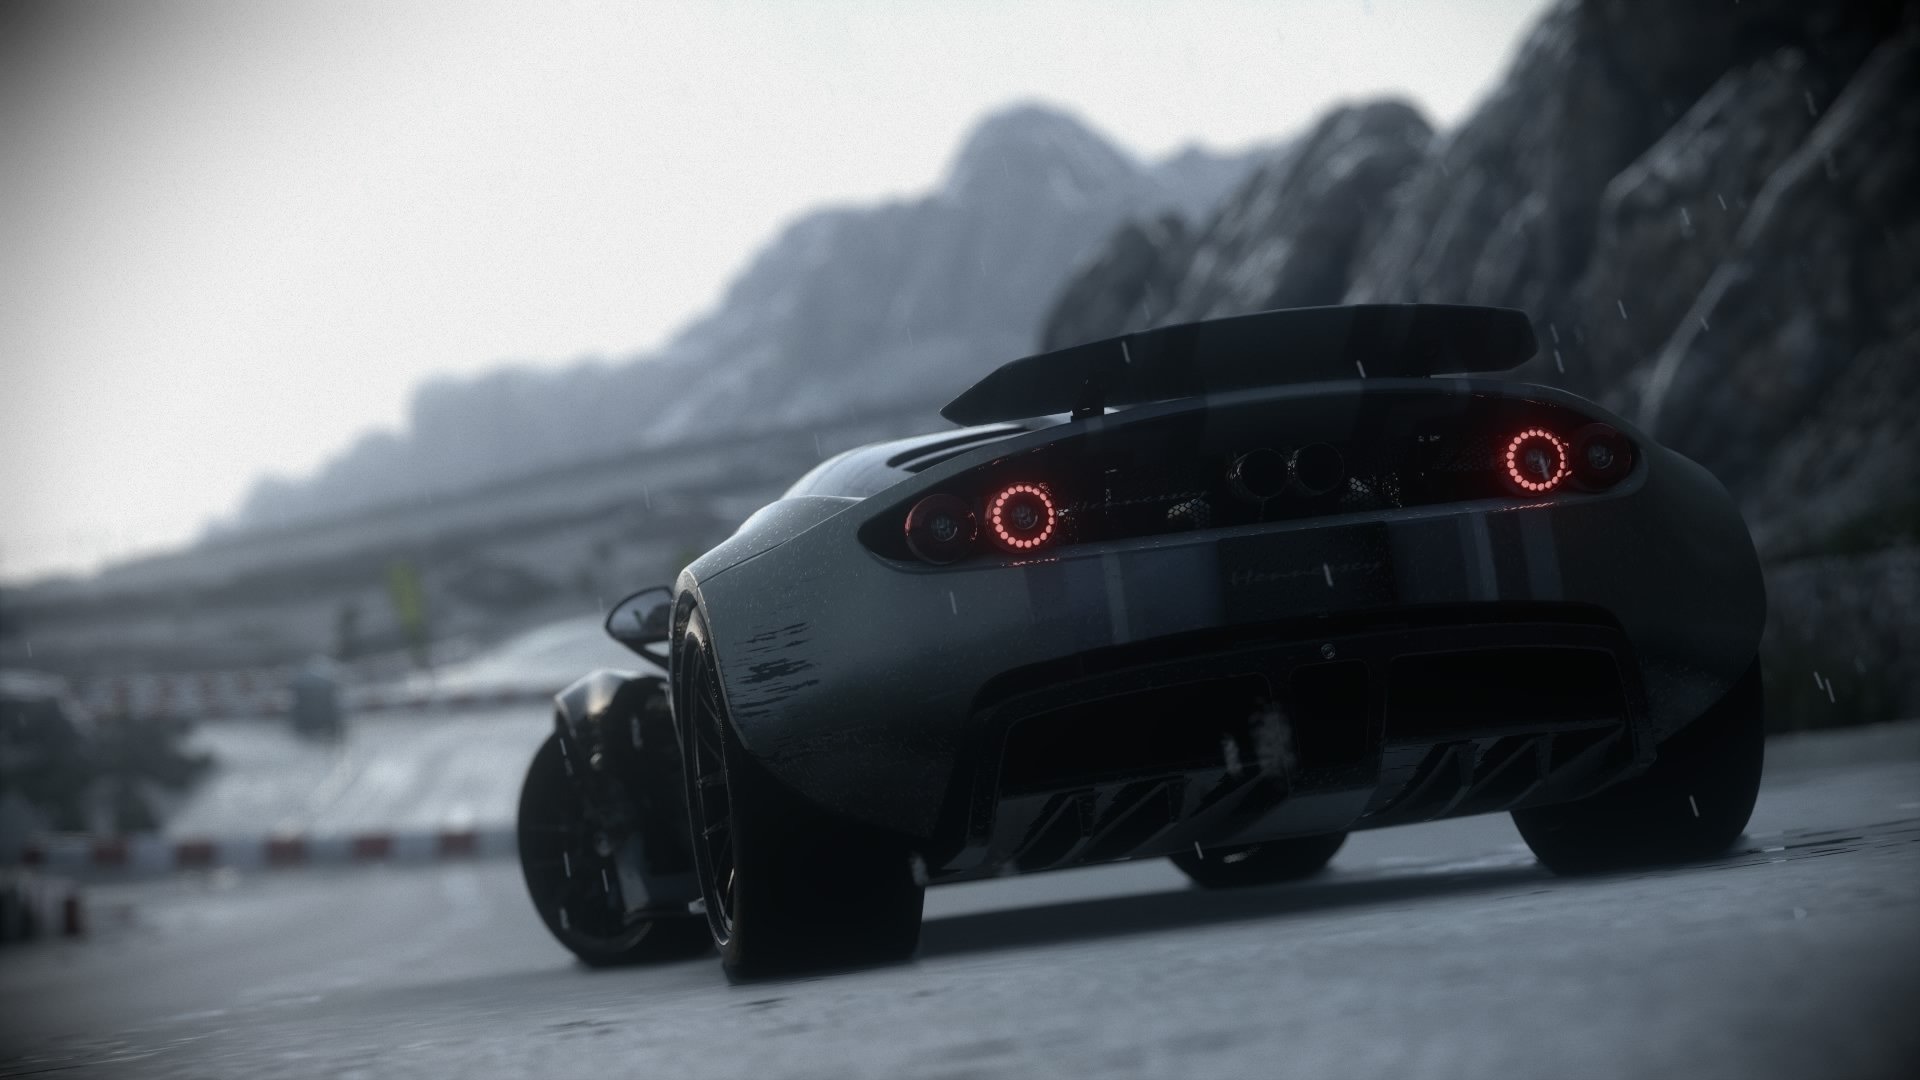 driveclub pc game download kickass